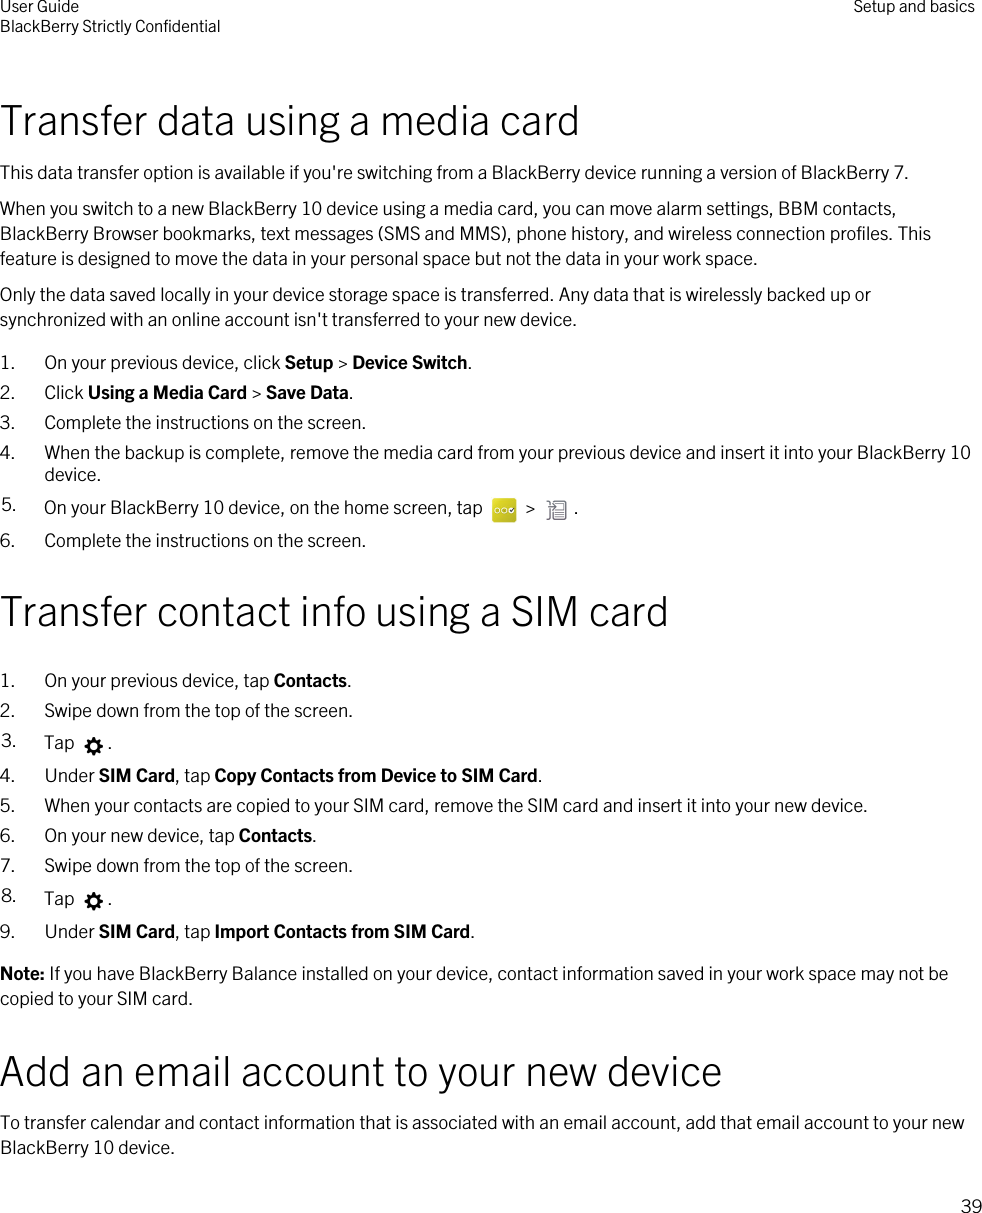 Transfer data using a media cardThis data transfer option is available if you&apos;re switching from a BlackBerry device running a version of BlackBerry 7.When you switch to a new BlackBerry 10 device using a media card, you can move alarm settings, BBM contacts, BlackBerry Browser bookmarks, text messages (SMS and MMS), phone history, and wireless connection profiles. This feature is designed to move the data in your personal space but not the data in your work space.Only the data saved locally in your device storage space is transferred. Any data that is wirelessly backed up or synchronized with an online account isn&apos;t transferred to your new device.1. On your previous device, click Setup &gt; Device Switch.2. Click Using a Media Card &gt; Save Data.3. Complete the instructions on the screen.4. When the backup is complete, remove the media card from your previous device and insert it into your BlackBerry 10 device.5. On your BlackBerry 10 device, on the home screen, tap   &gt;  .6. Complete the instructions on the screen.Transfer contact info using a SIM card1. On your previous device, tap Contacts.2. Swipe down from the top of the screen.3. Tap  .4. Under SIM Card, tap Copy Contacts from Device to SIM Card.5. When your contacts are copied to your SIM card, remove the SIM card and insert it into your new device.6. On your new device, tap Contacts.7. Swipe down from the top of the screen.8. Tap  .9. Under SIM Card, tap Import Contacts from SIM Card.Note: If you have BlackBerry Balance installed on your device, contact information saved in your work space may not be copied to your SIM card.Add an email account to your new deviceTo transfer calendar and contact information that is associated with an email account, add that email account to your new BlackBerry 10 device.User GuideBlackBerry Strictly Confidential Setup and basics39